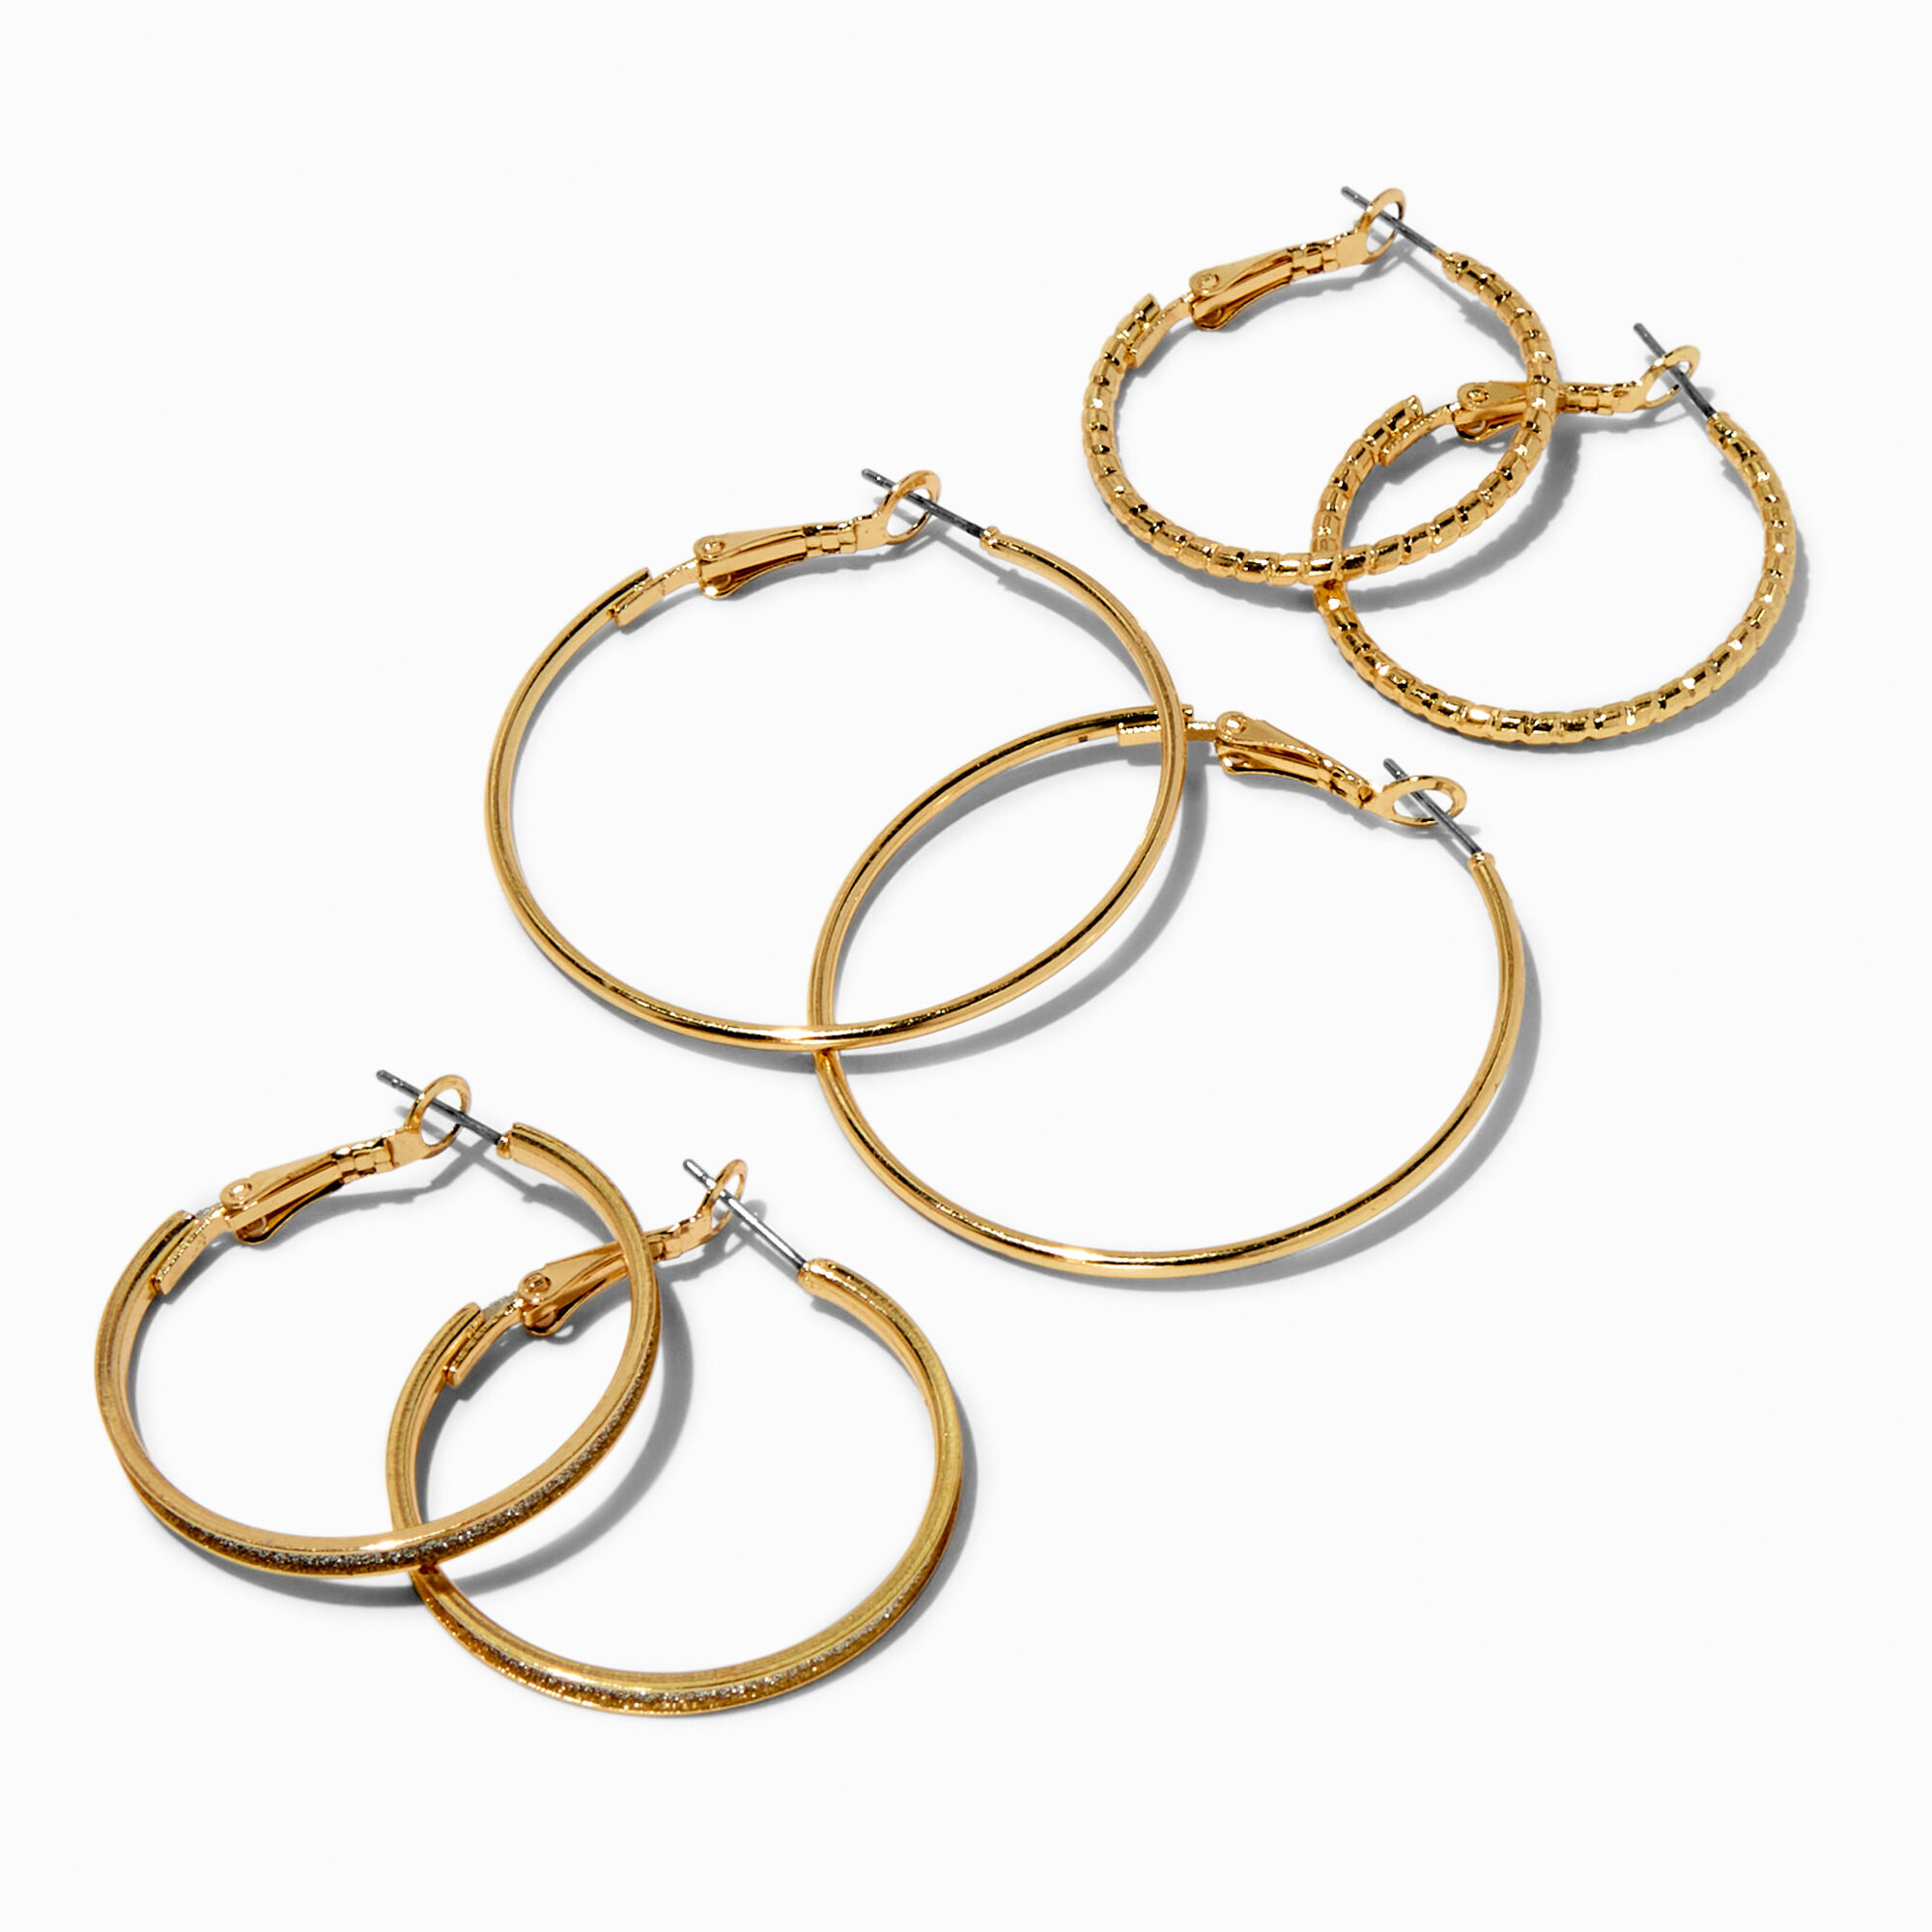 View Claires Tone Graduated Textured Hoop Earrings 3 Pack Gold information